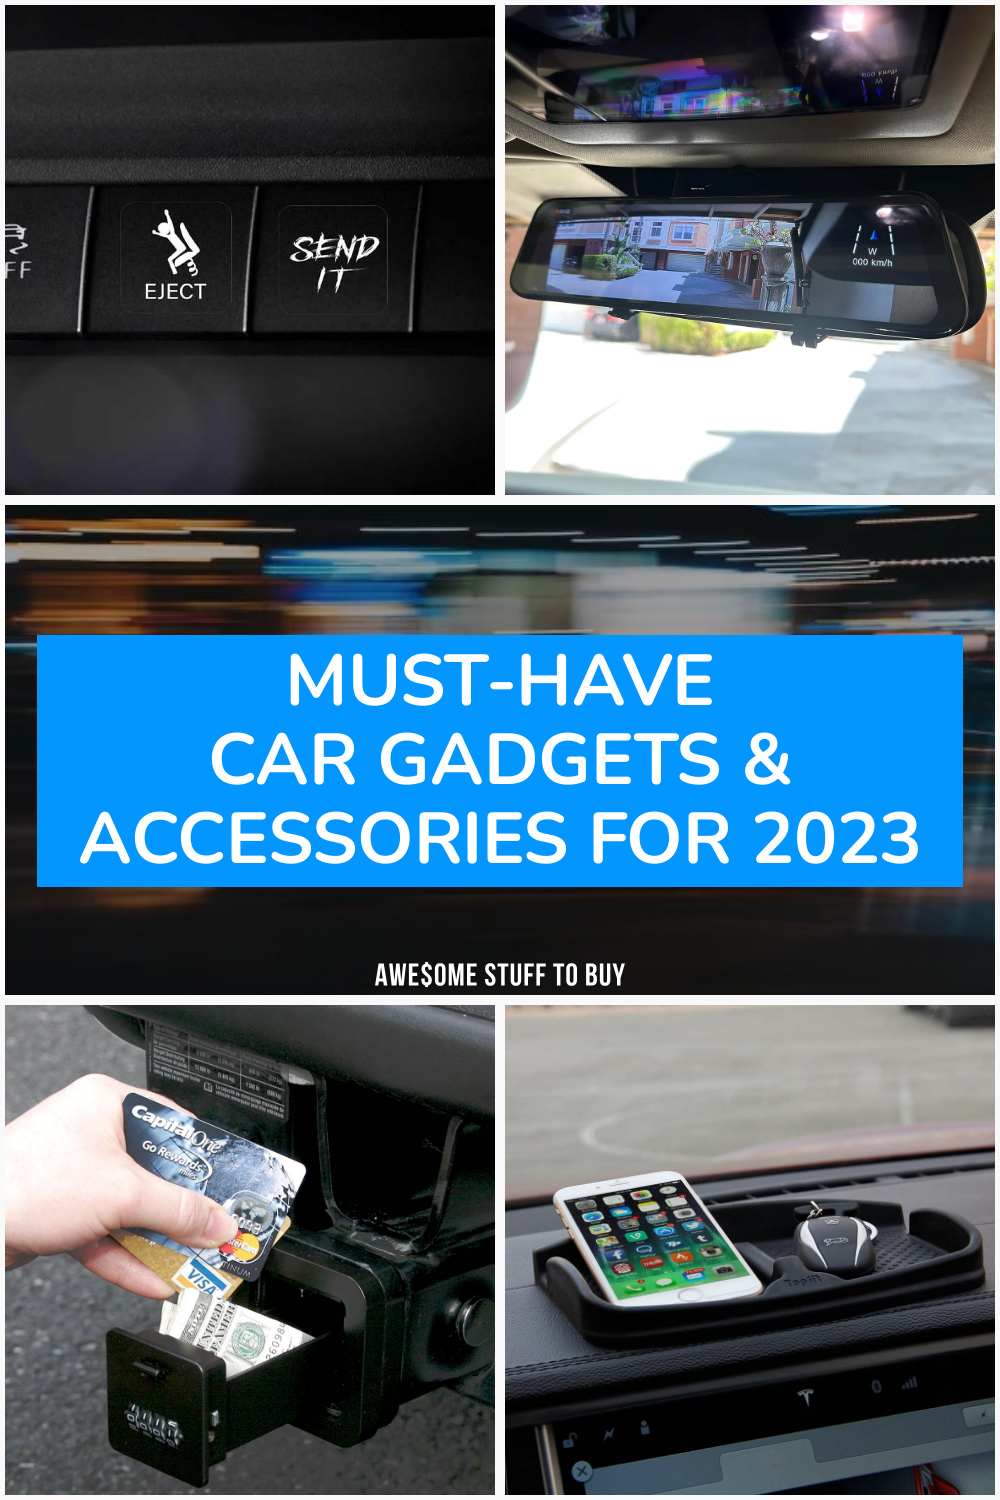 37 Must-Have Car Gadgets & Accessories for 2023